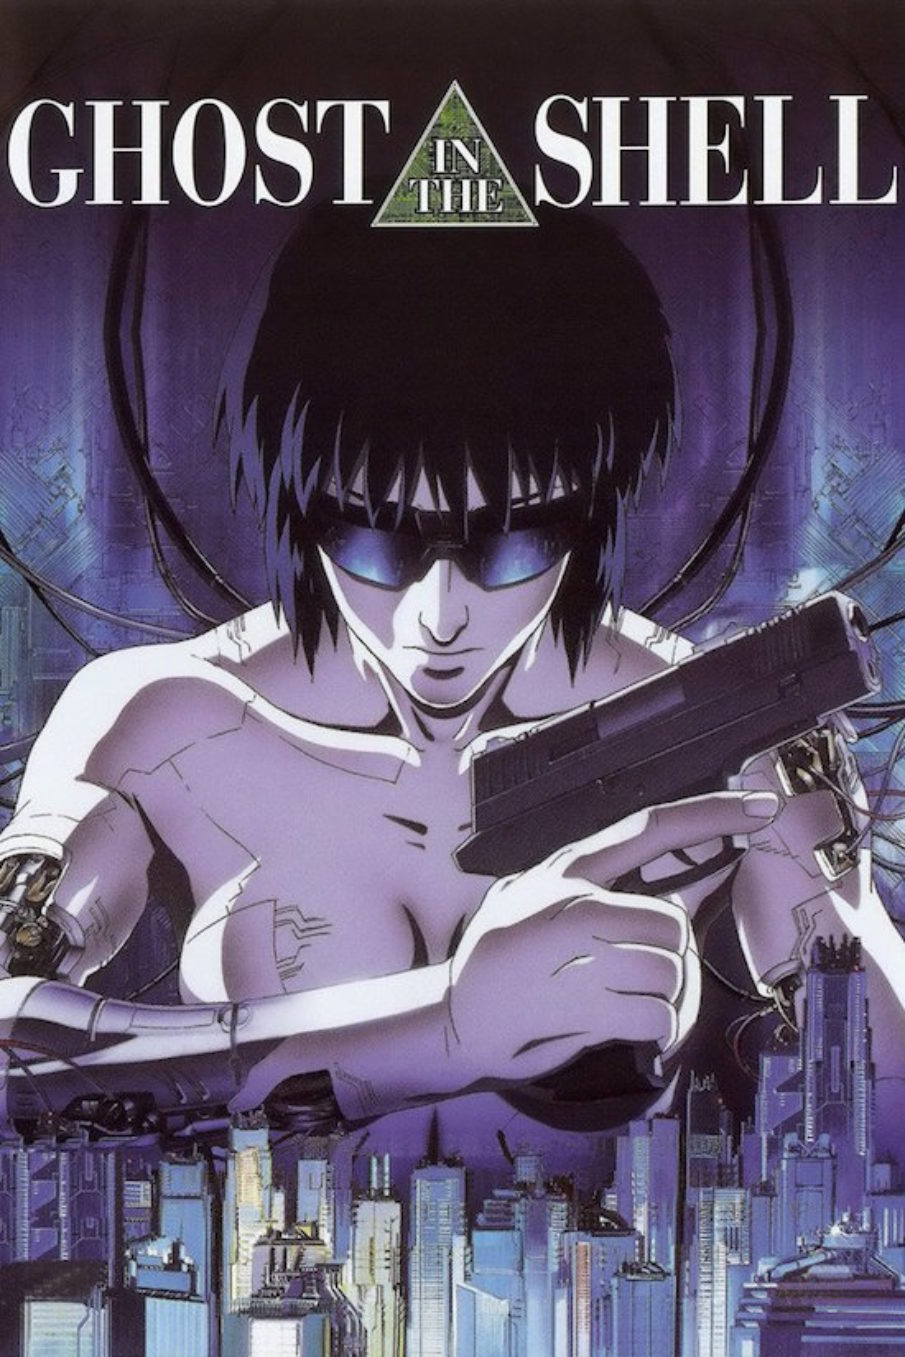 Movie Diary: Ghost in the Shell (1995)